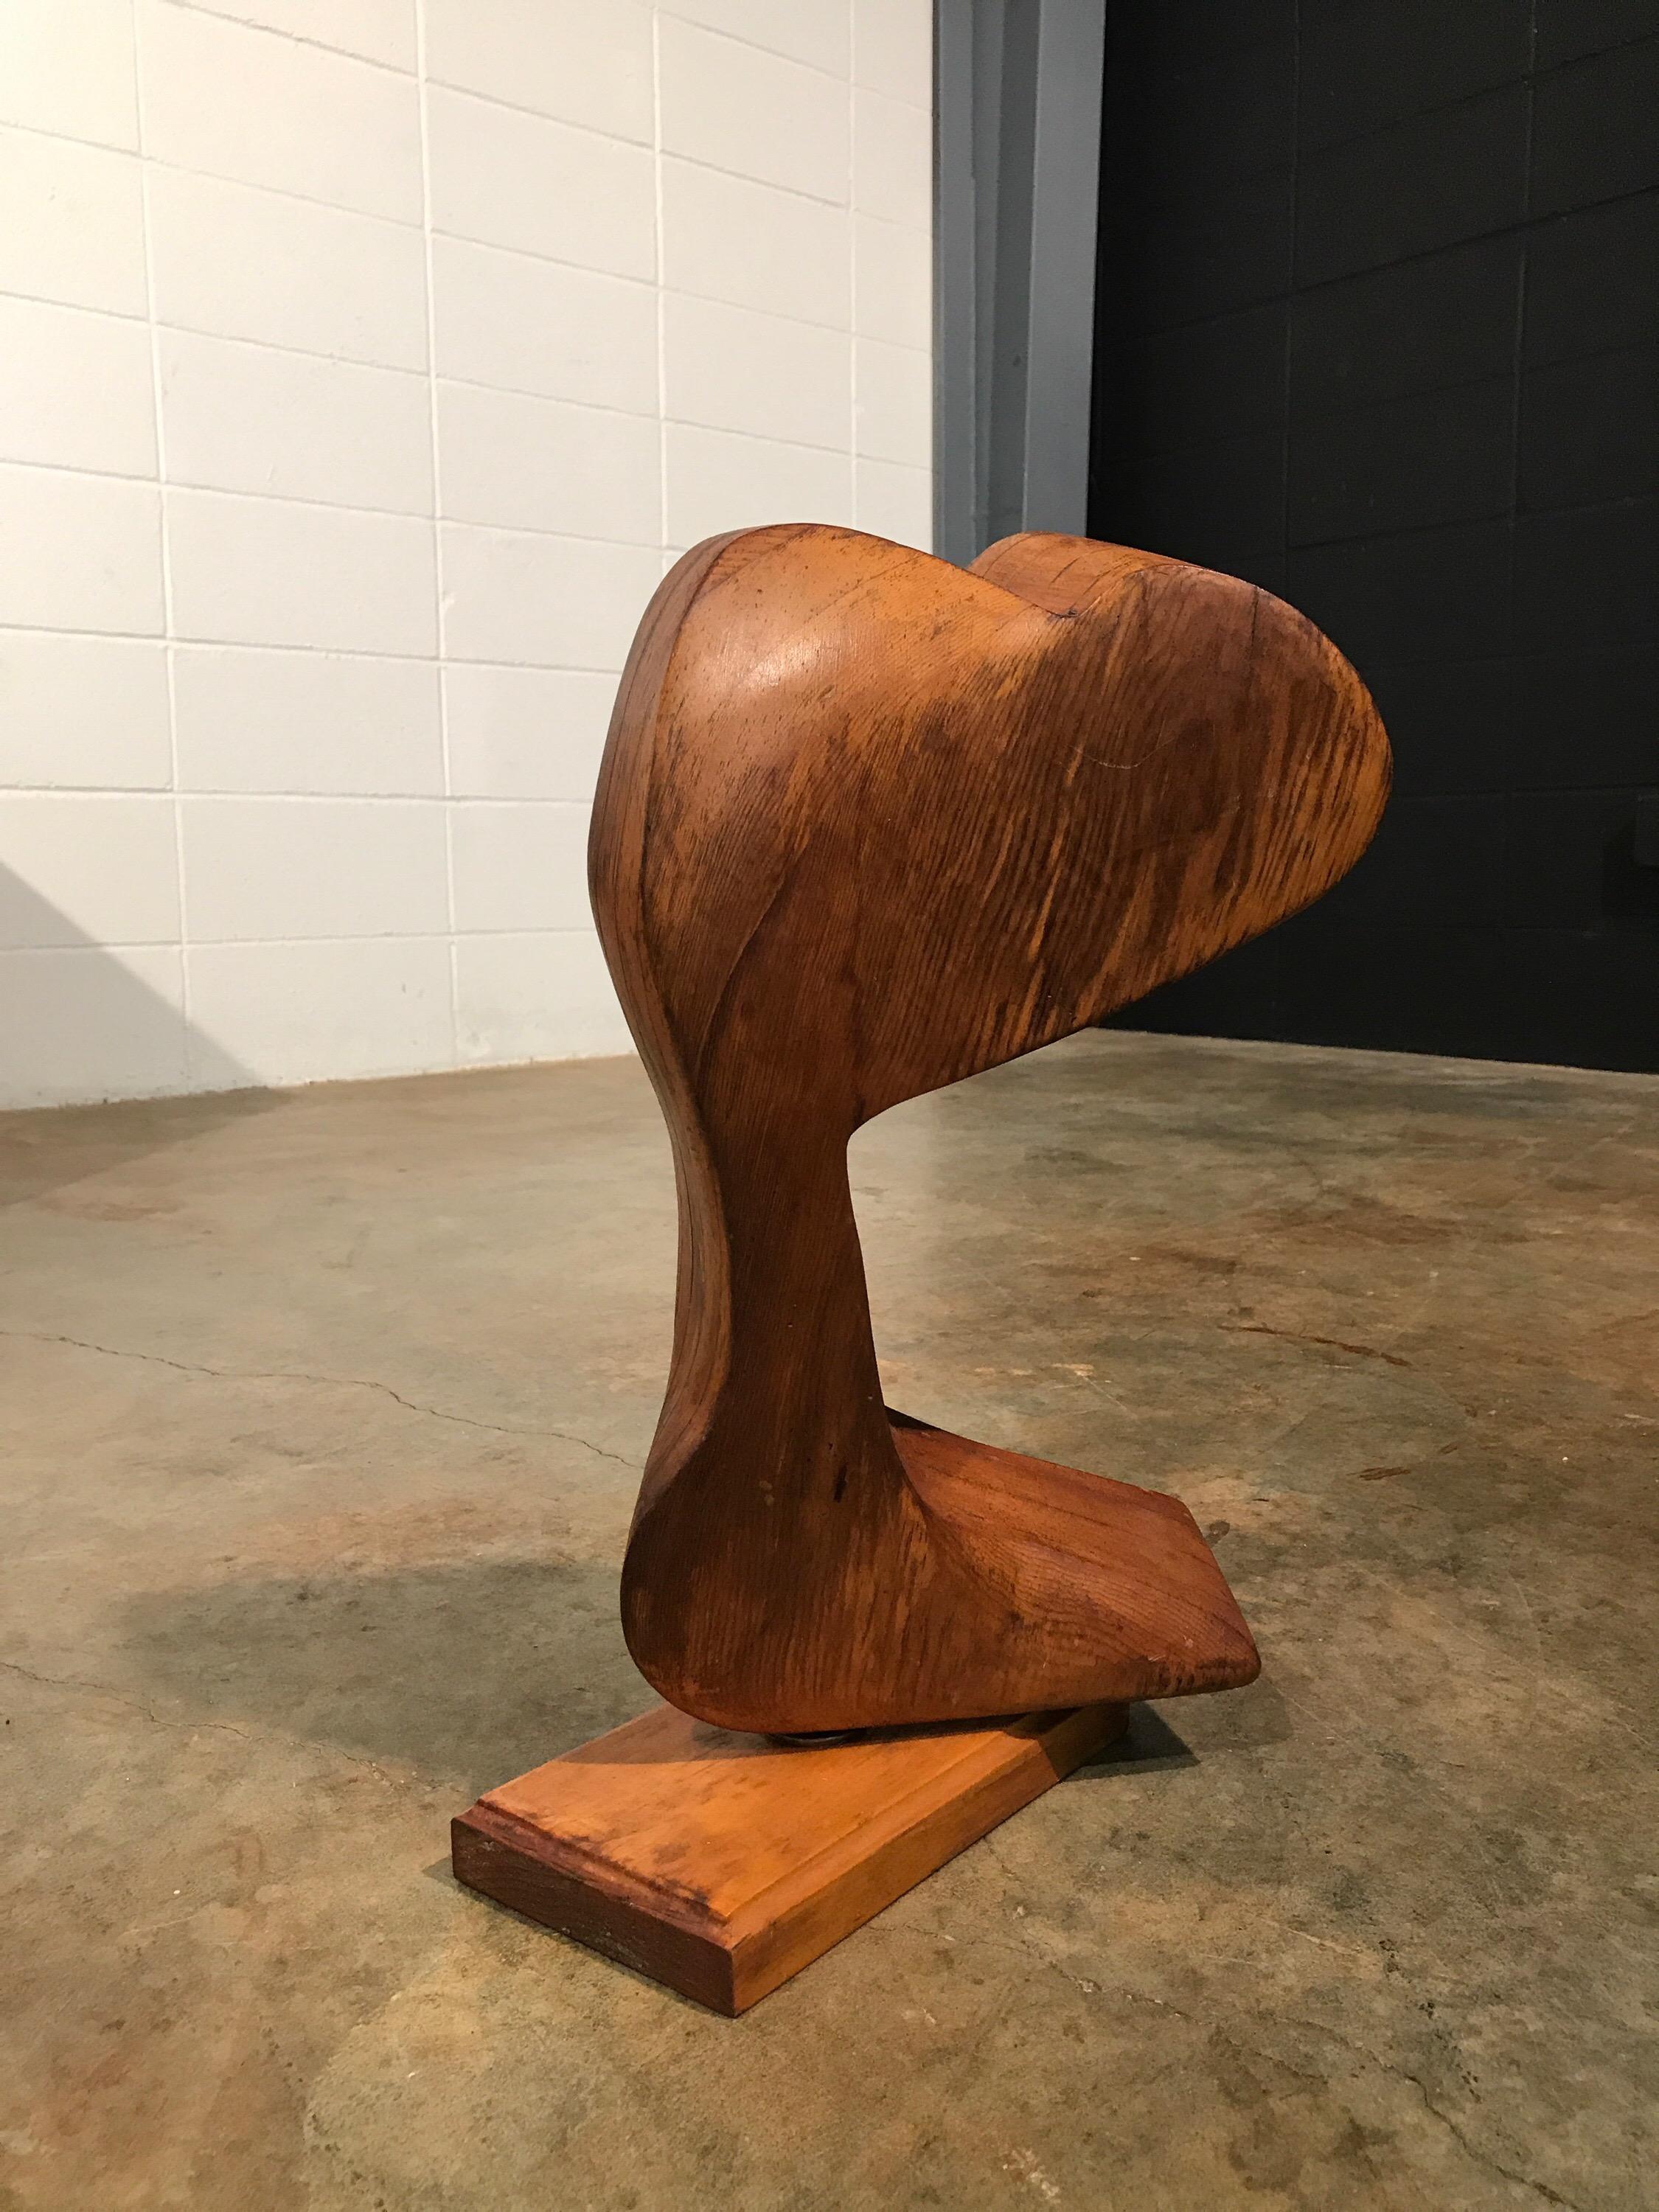 Early modern wood sculpture artist signed L Ryan 1951 - Rogue Wave. Unique and likely one of a kind. This sculpture is in its original condition and shows signs of age. It is structurally sound and ready for display.
 